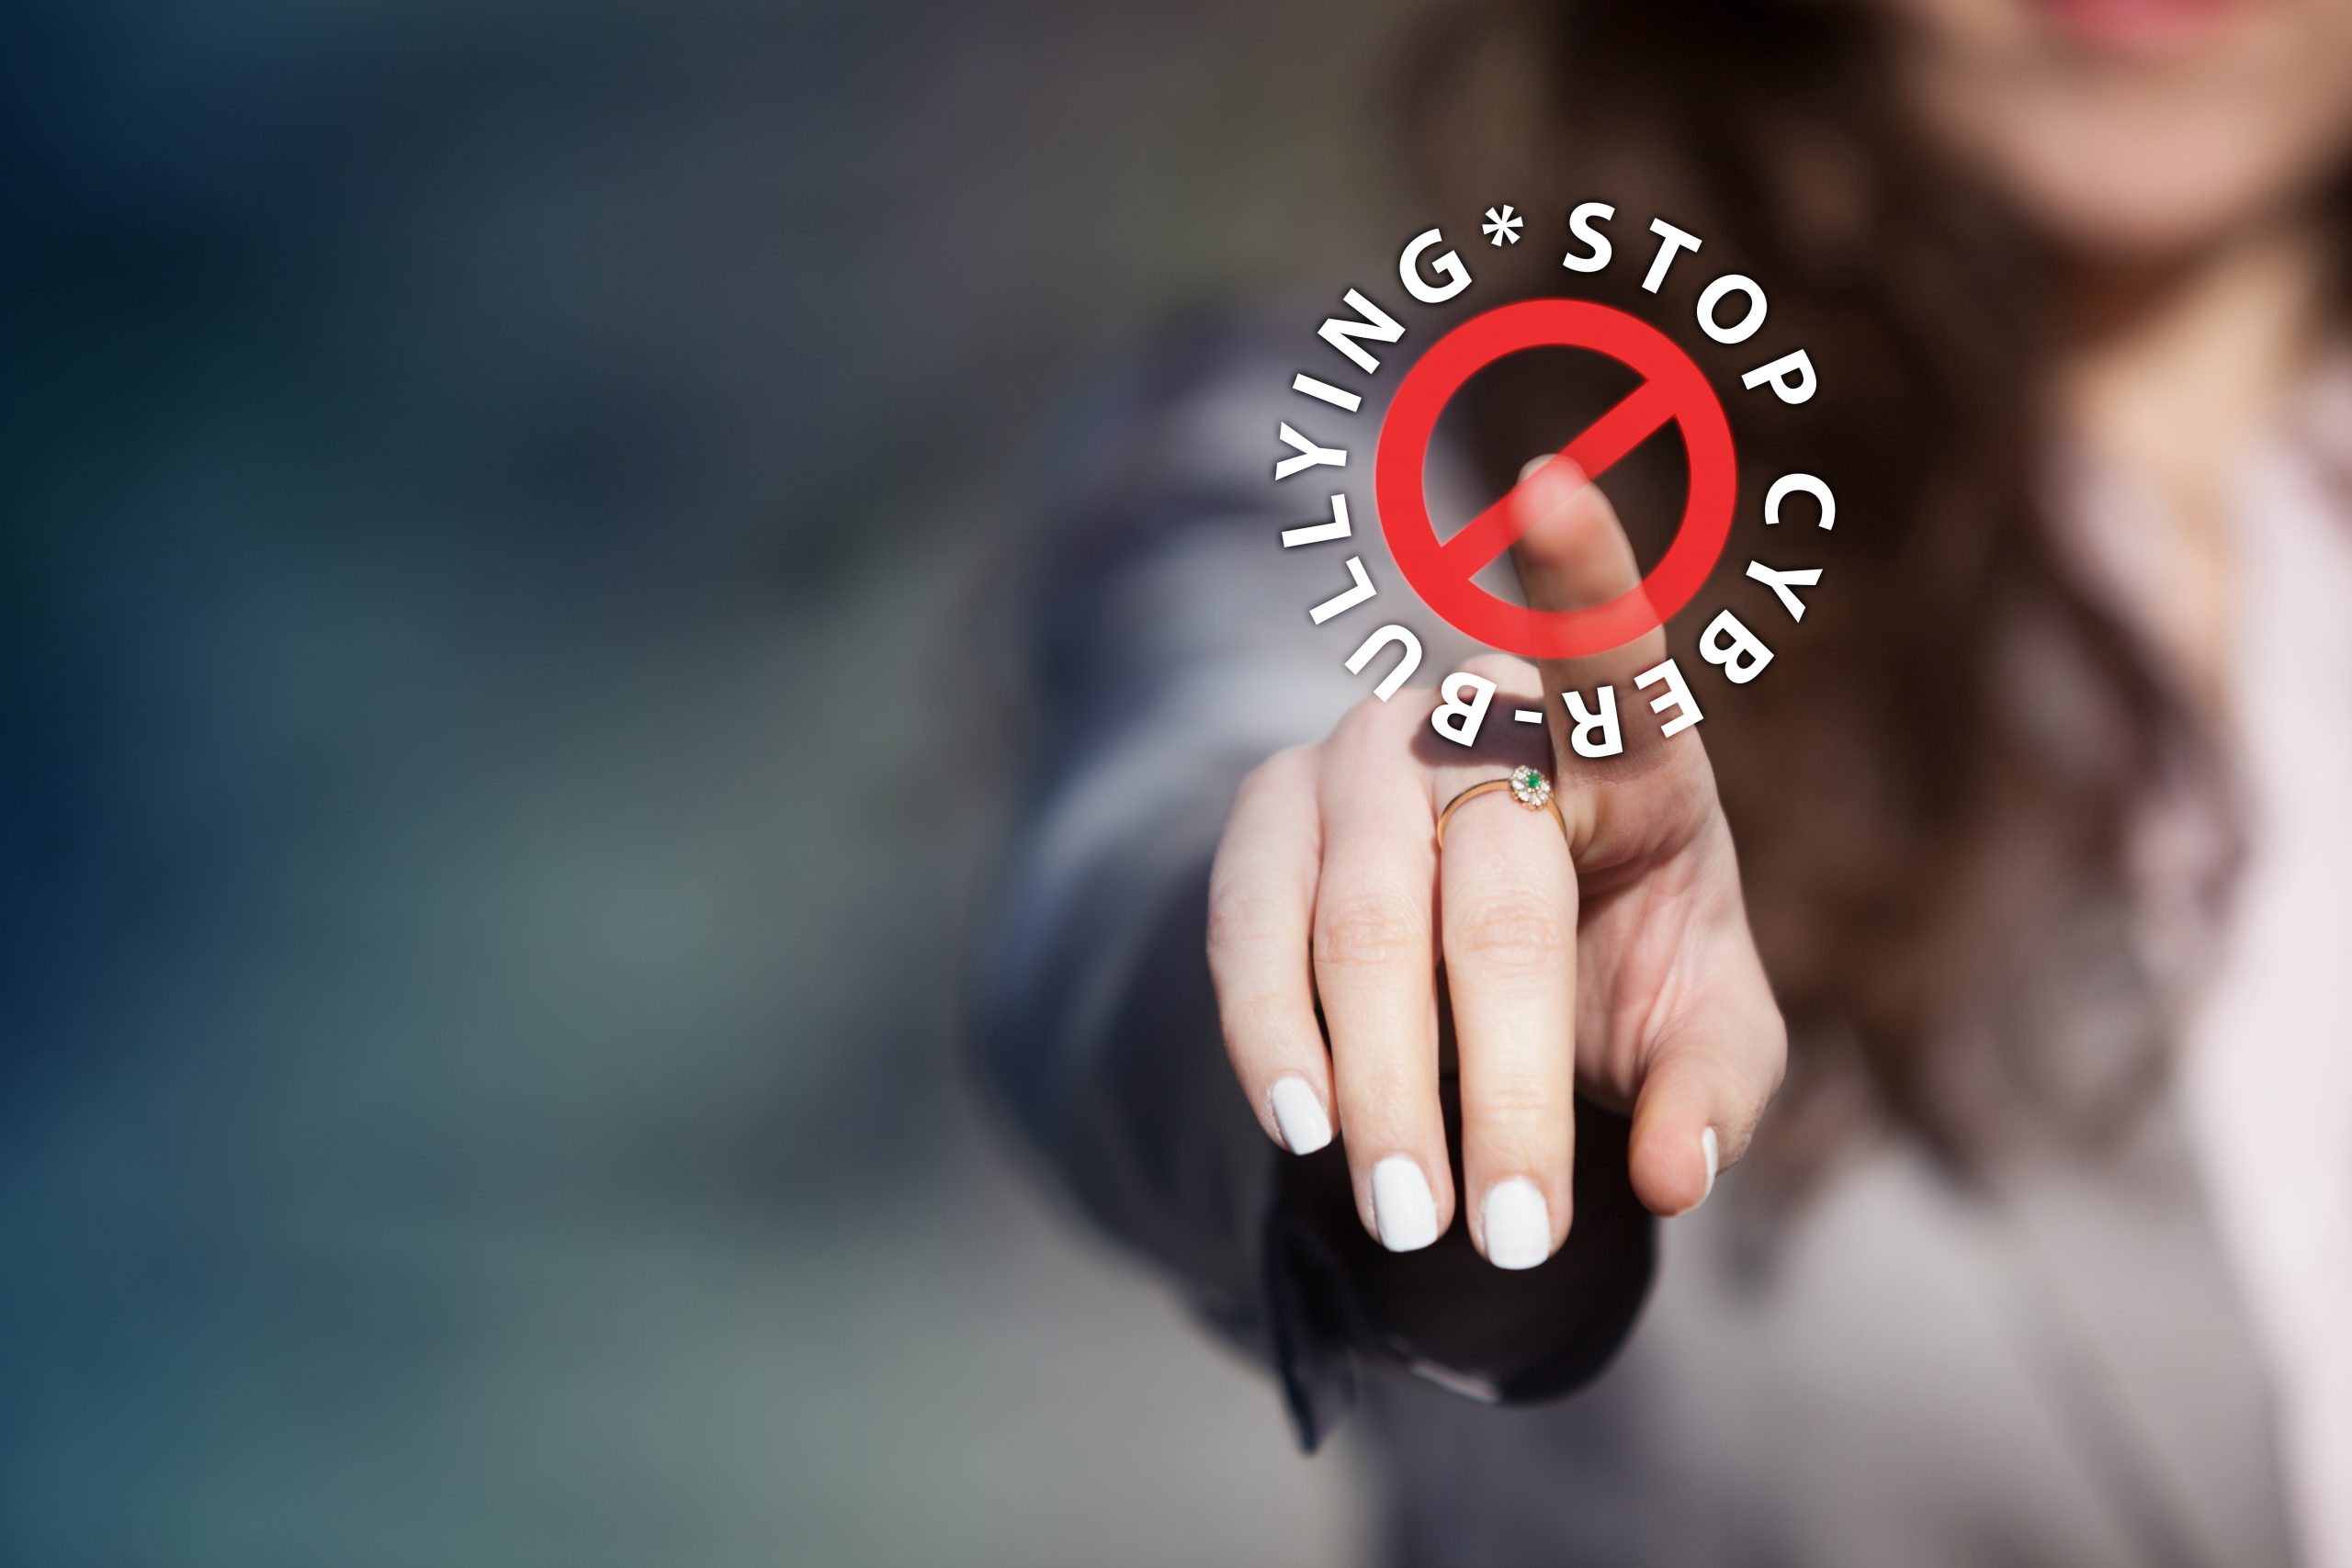 Photo of person with outstretched hand touching text and sign for stop cyber bullying